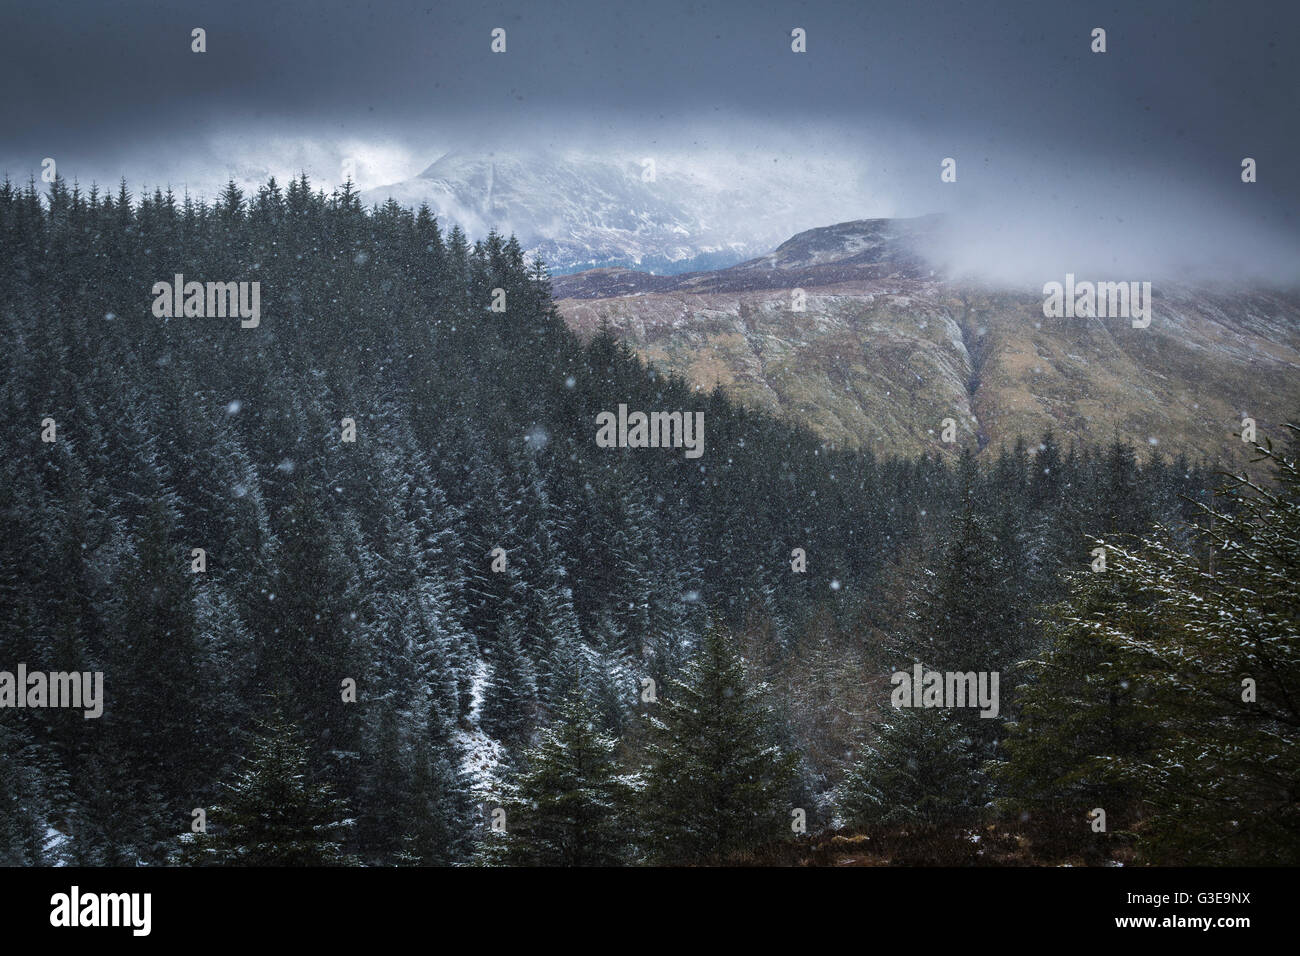 Snow falling on Scots pine forest under a leaden sky, Western Highlands, Scotland Stock Photo